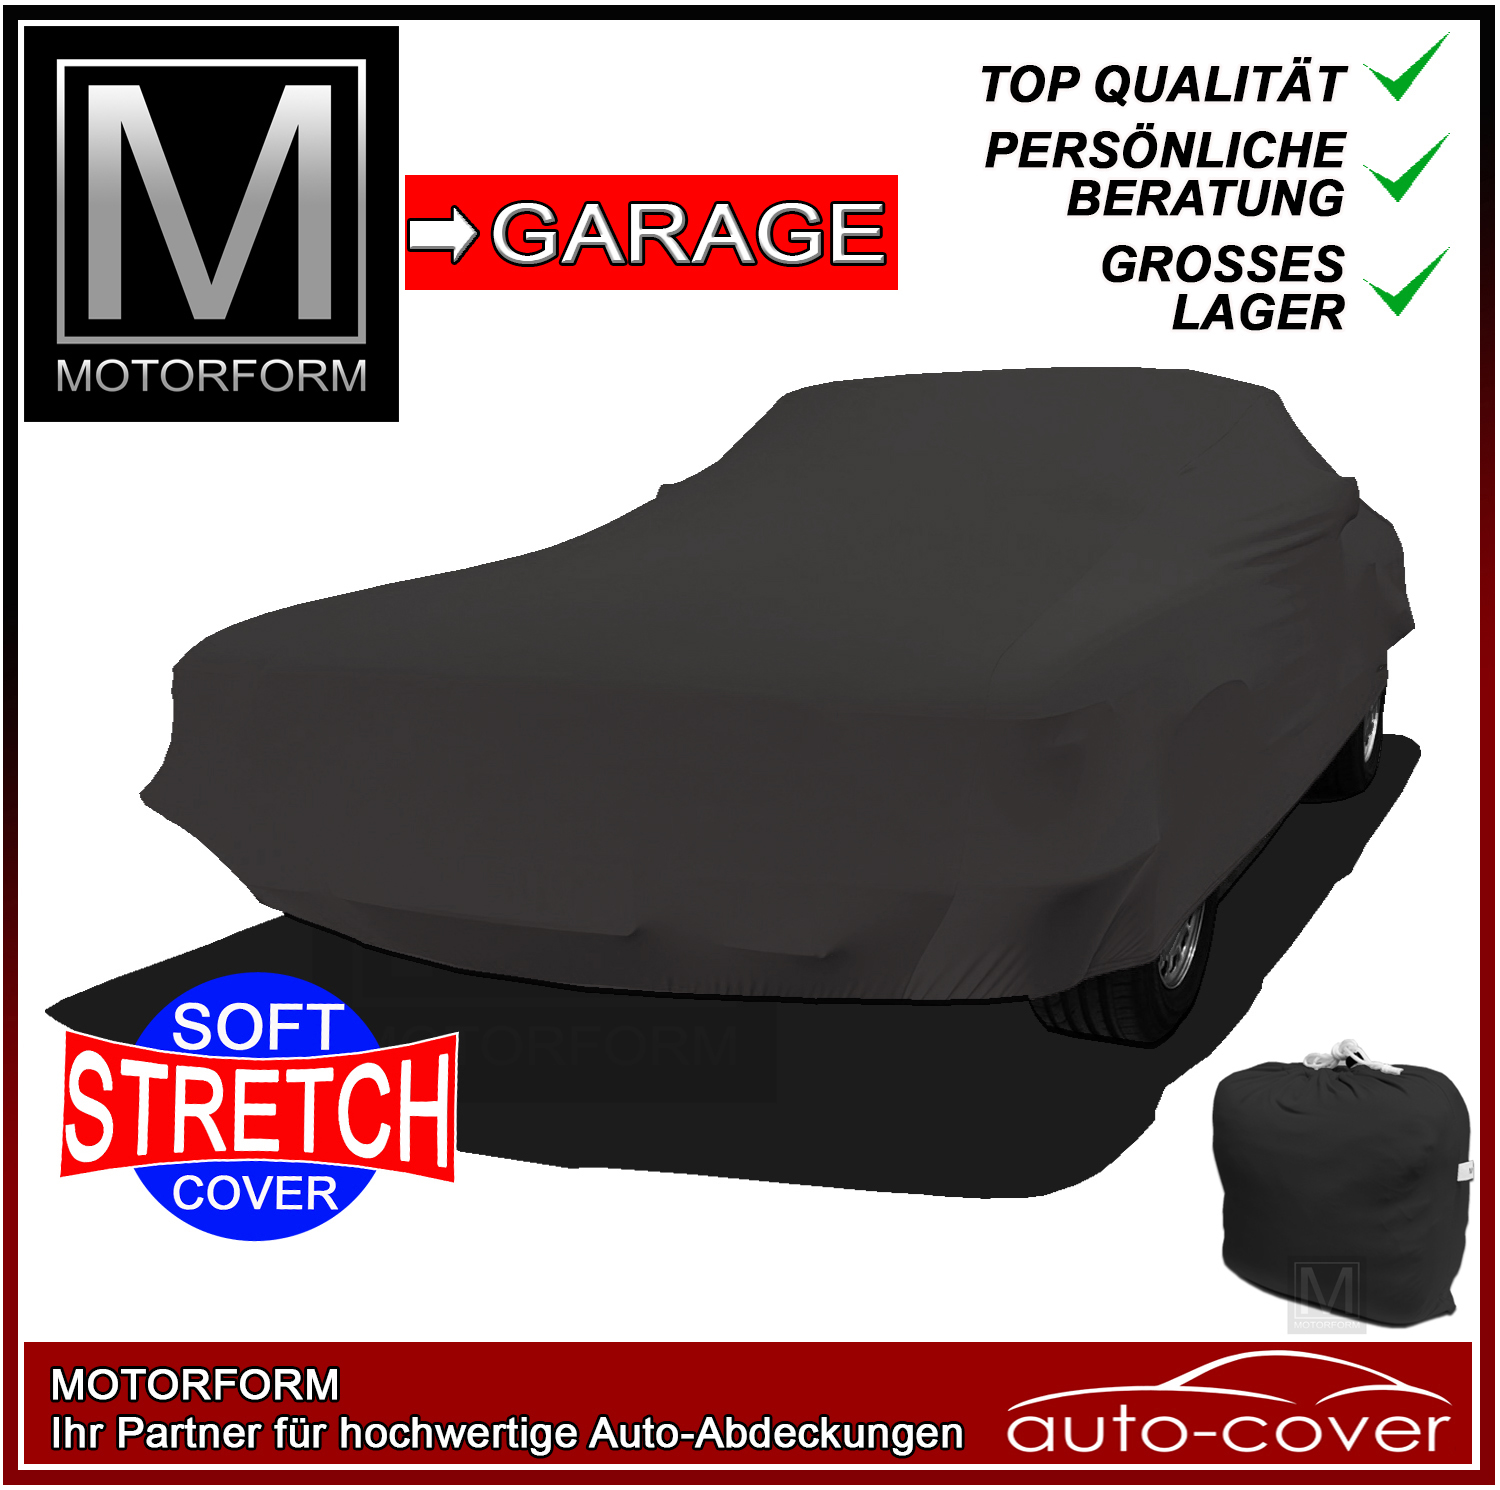 Super Stretchy Cover for Mercedes CLS-Class W257 C257 (2018-)